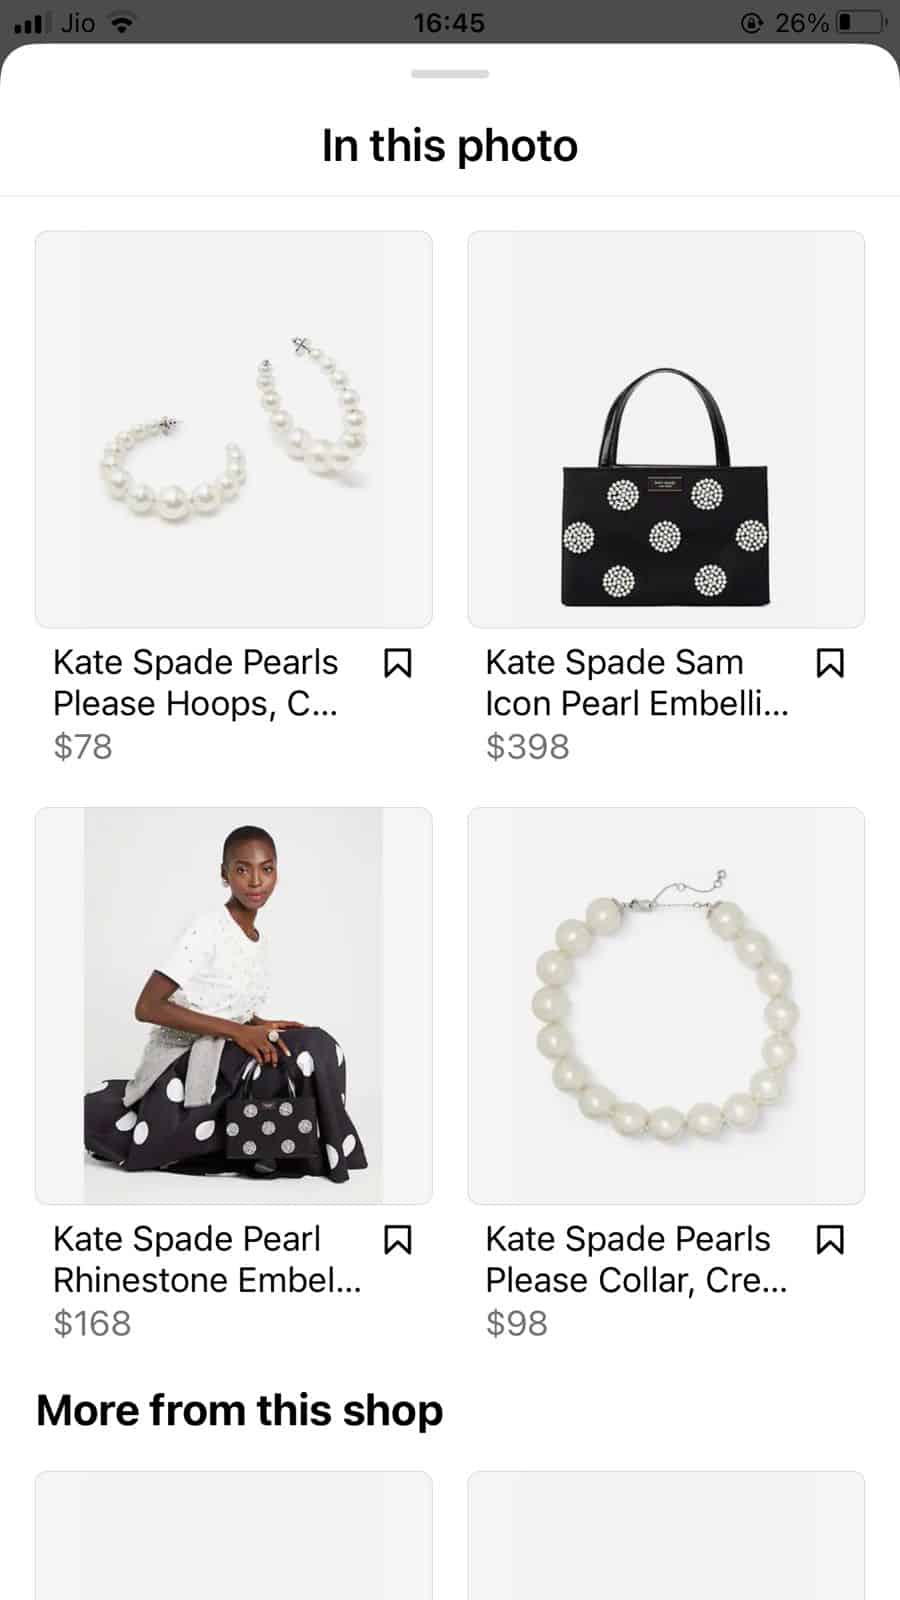 Tagging multiple products in shoppable Instagram posts